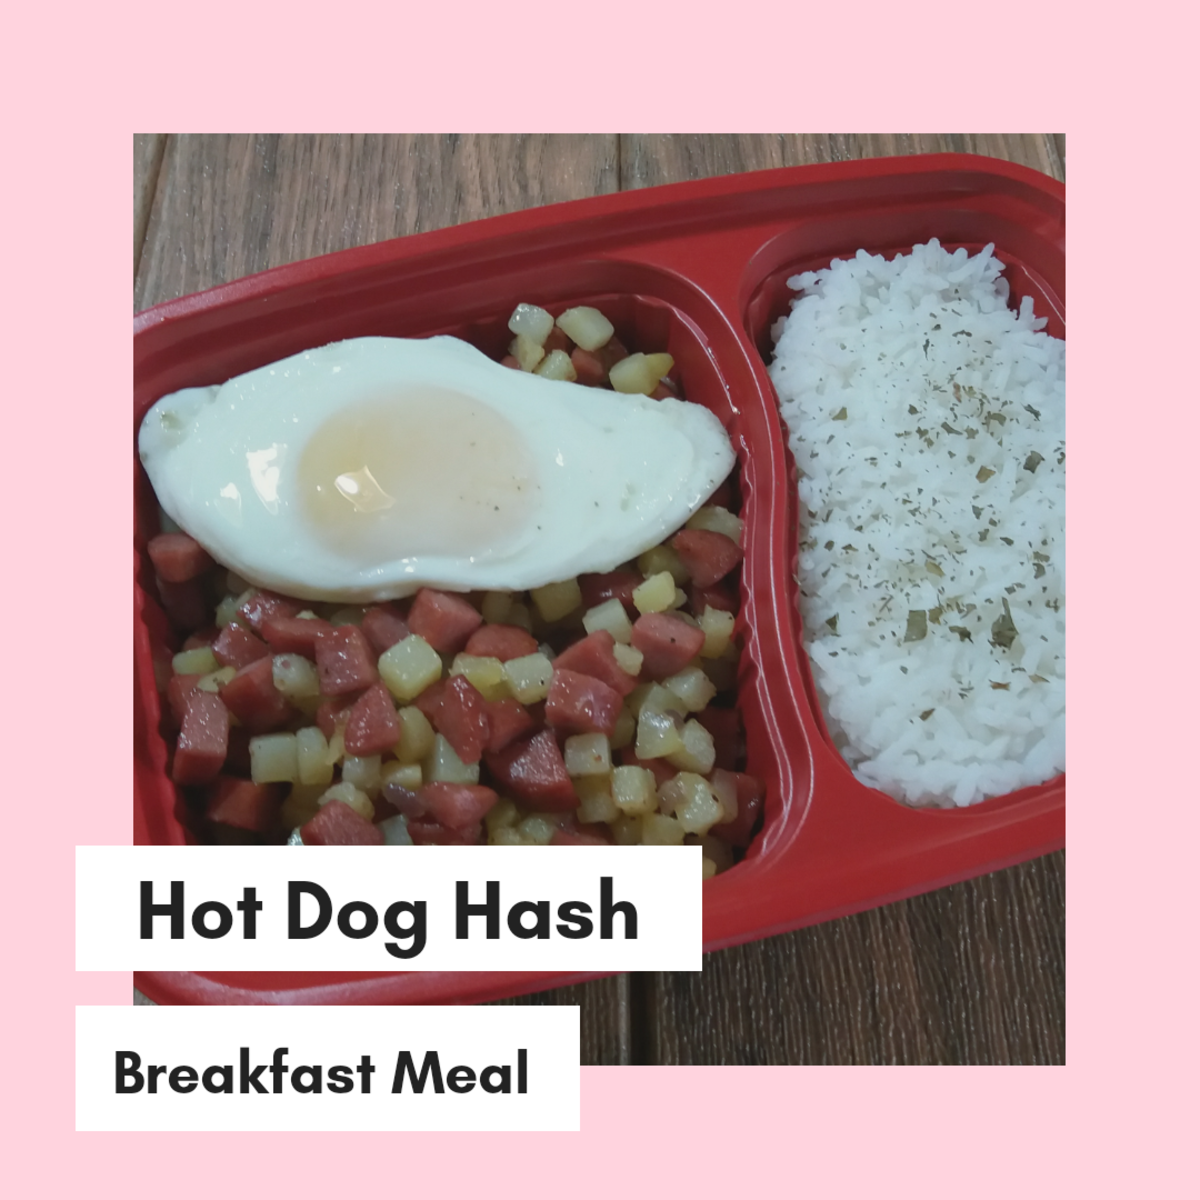 How to Cook Hot Dog Hash